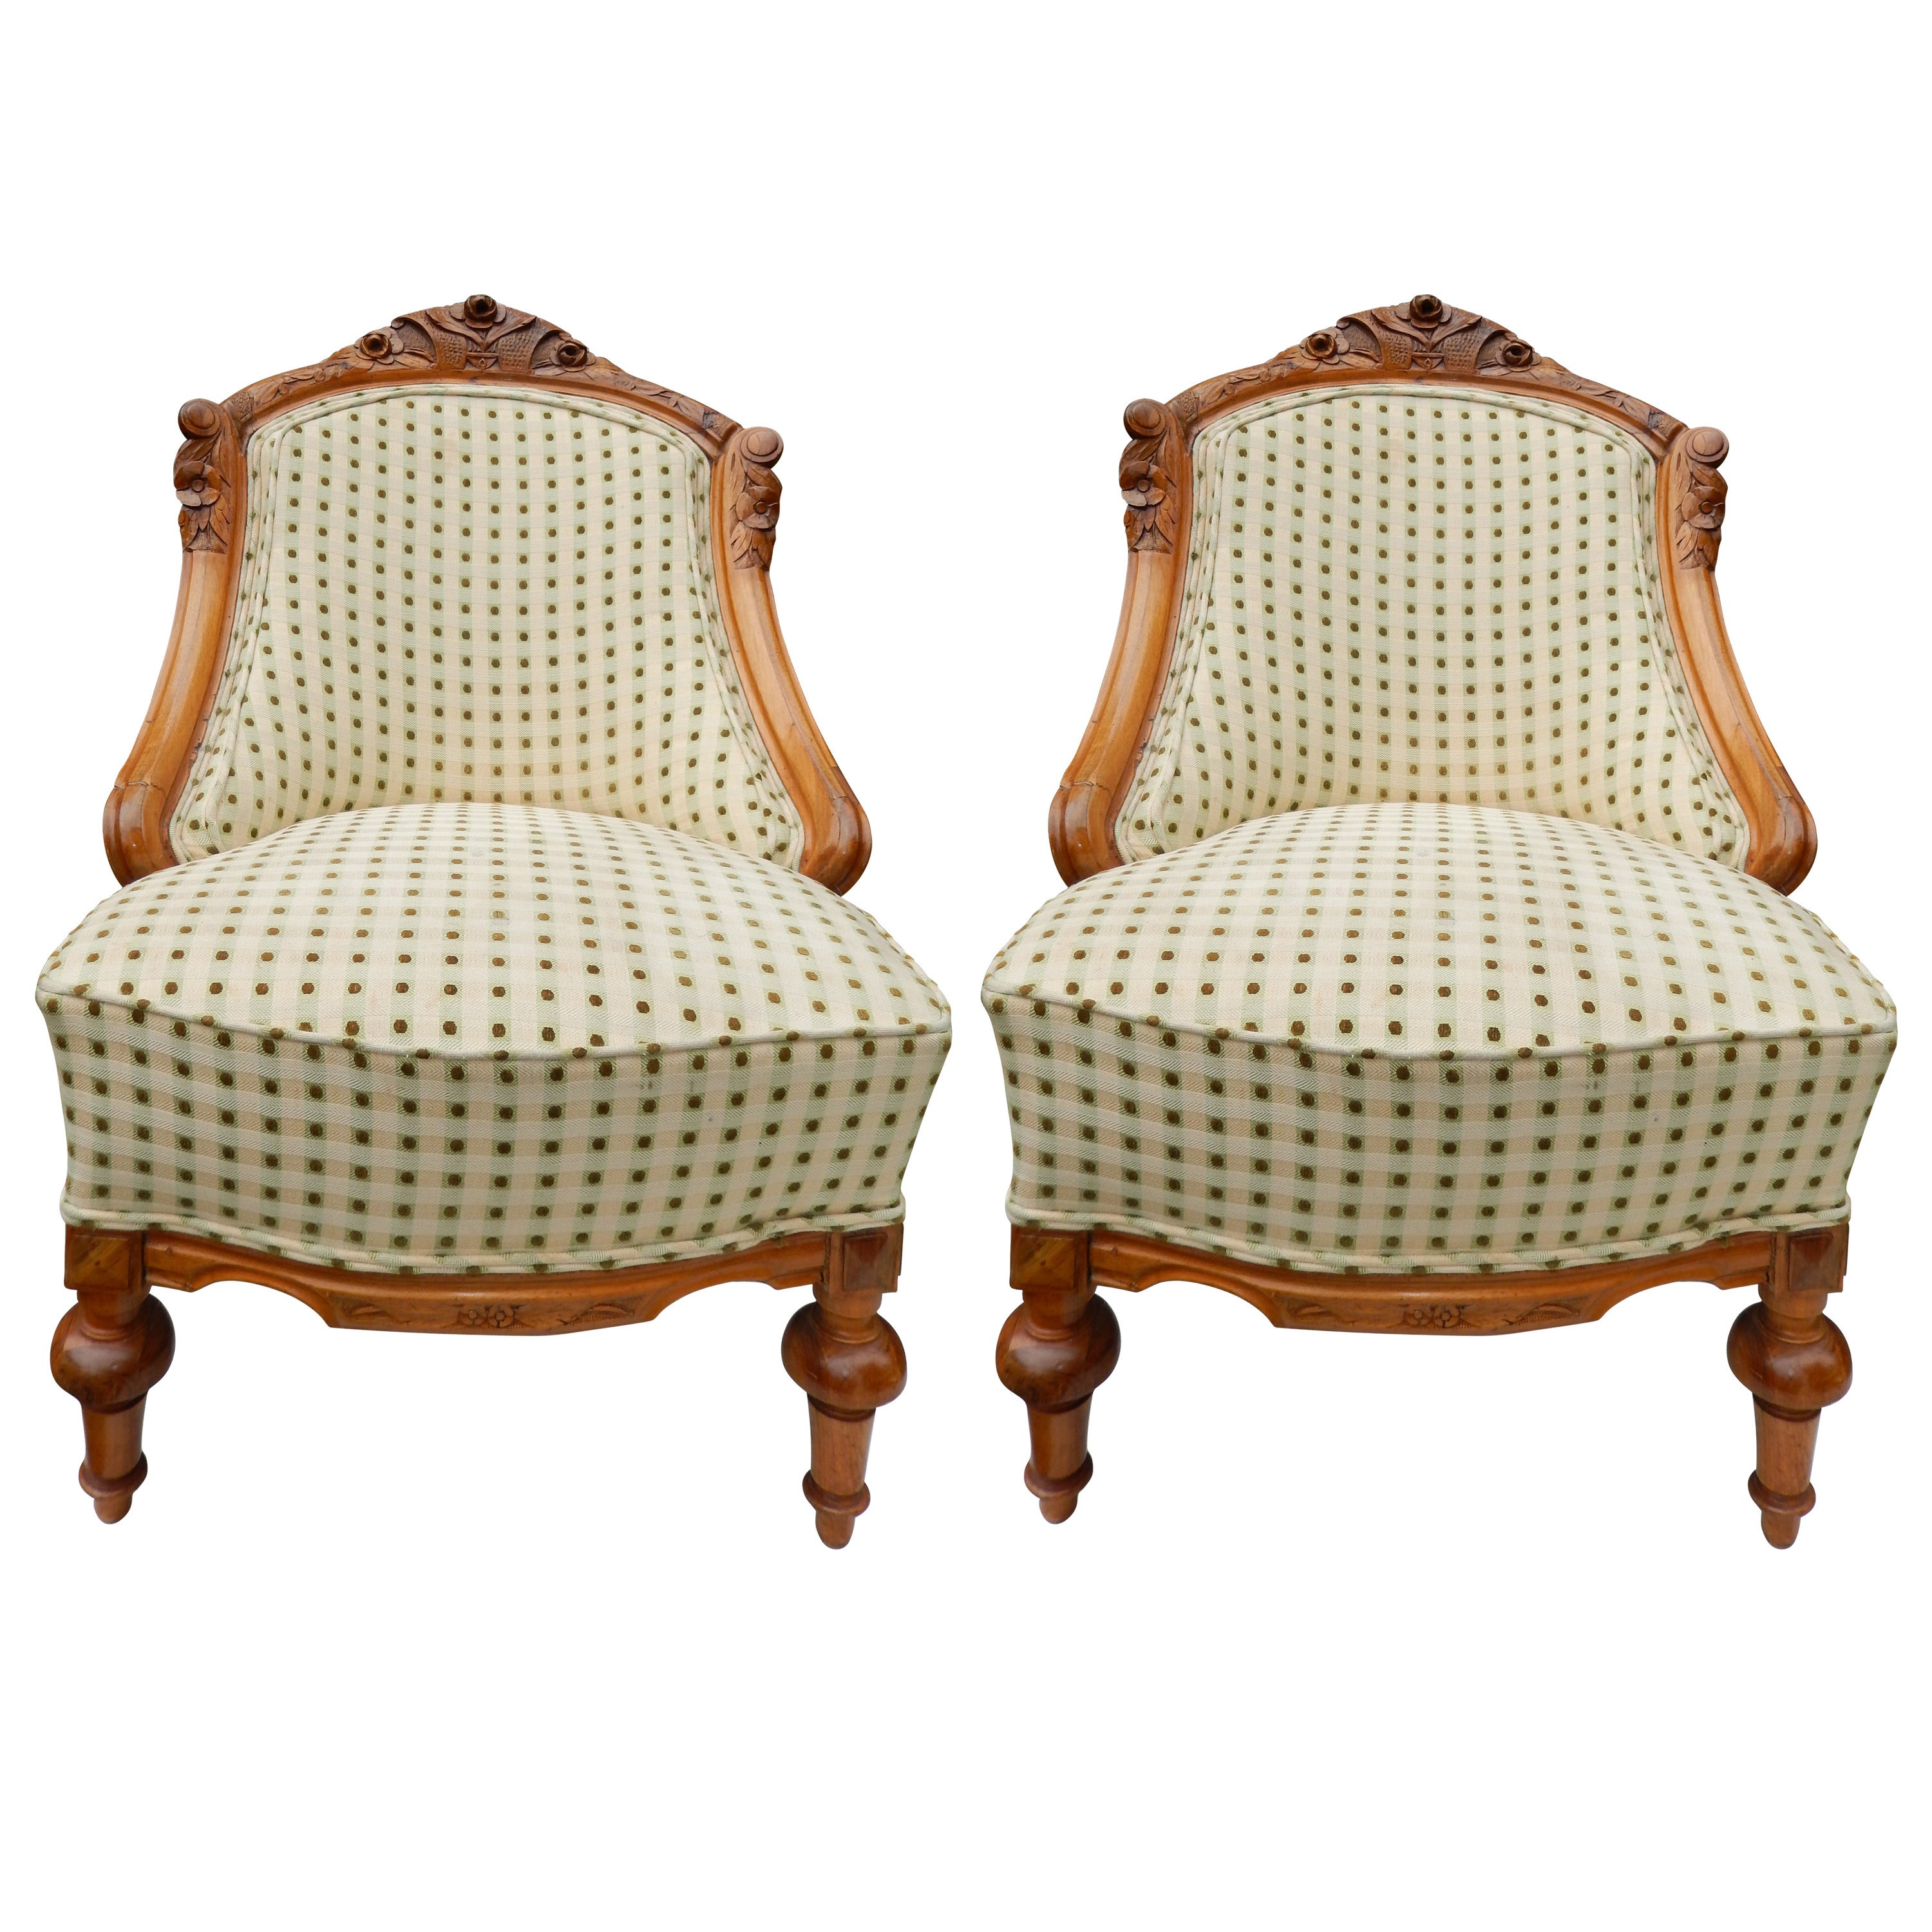 A Fine Pair of hand crafted  American 19th century slipper chairs. 1880-1890